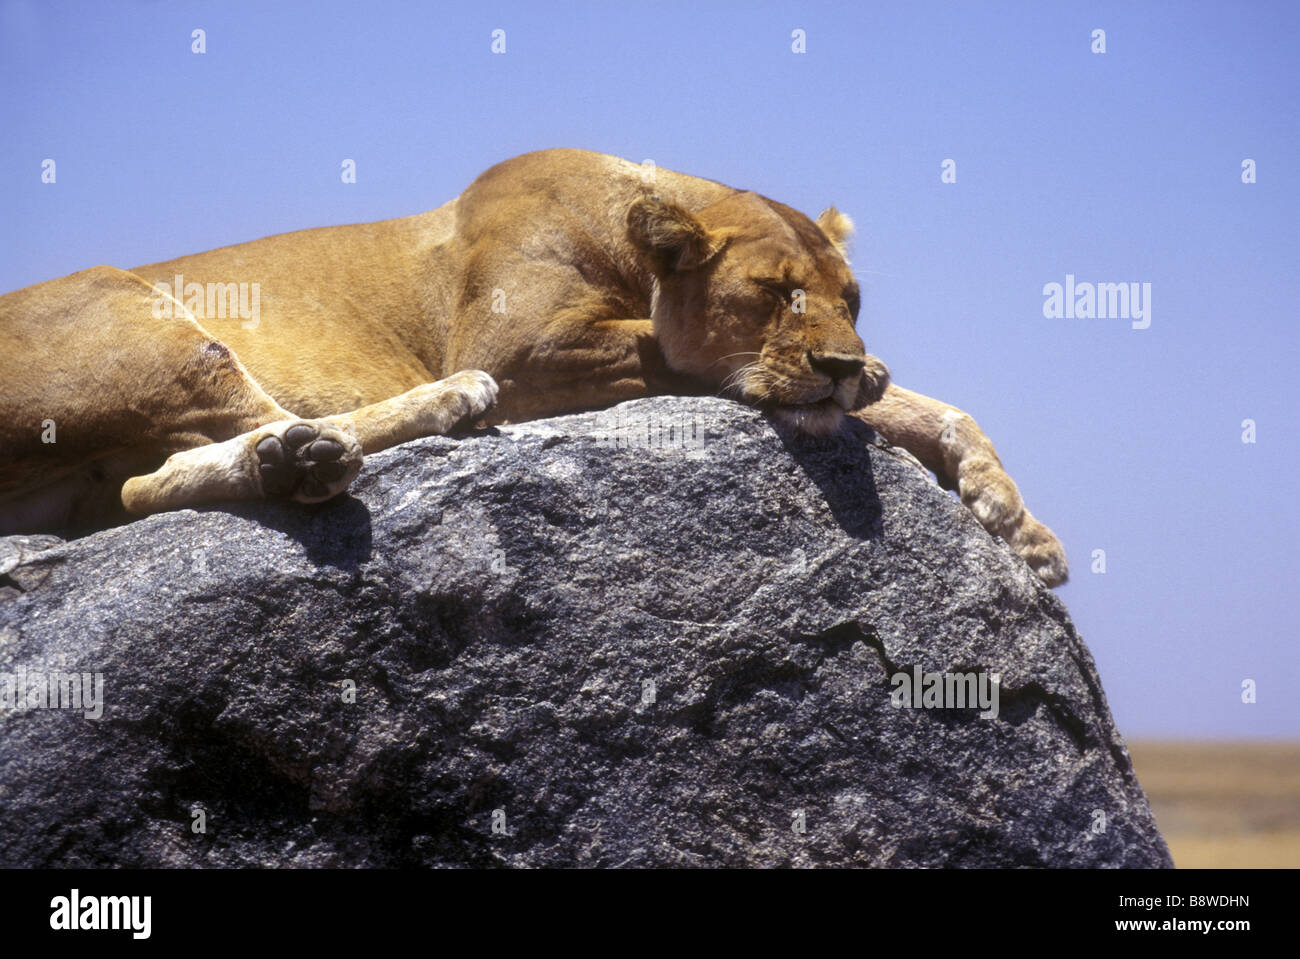 Portrait of a lioness sleeping on a large boulder at Simba Kopjes Serengeti National Park Tanzania East Africa Stock Photo